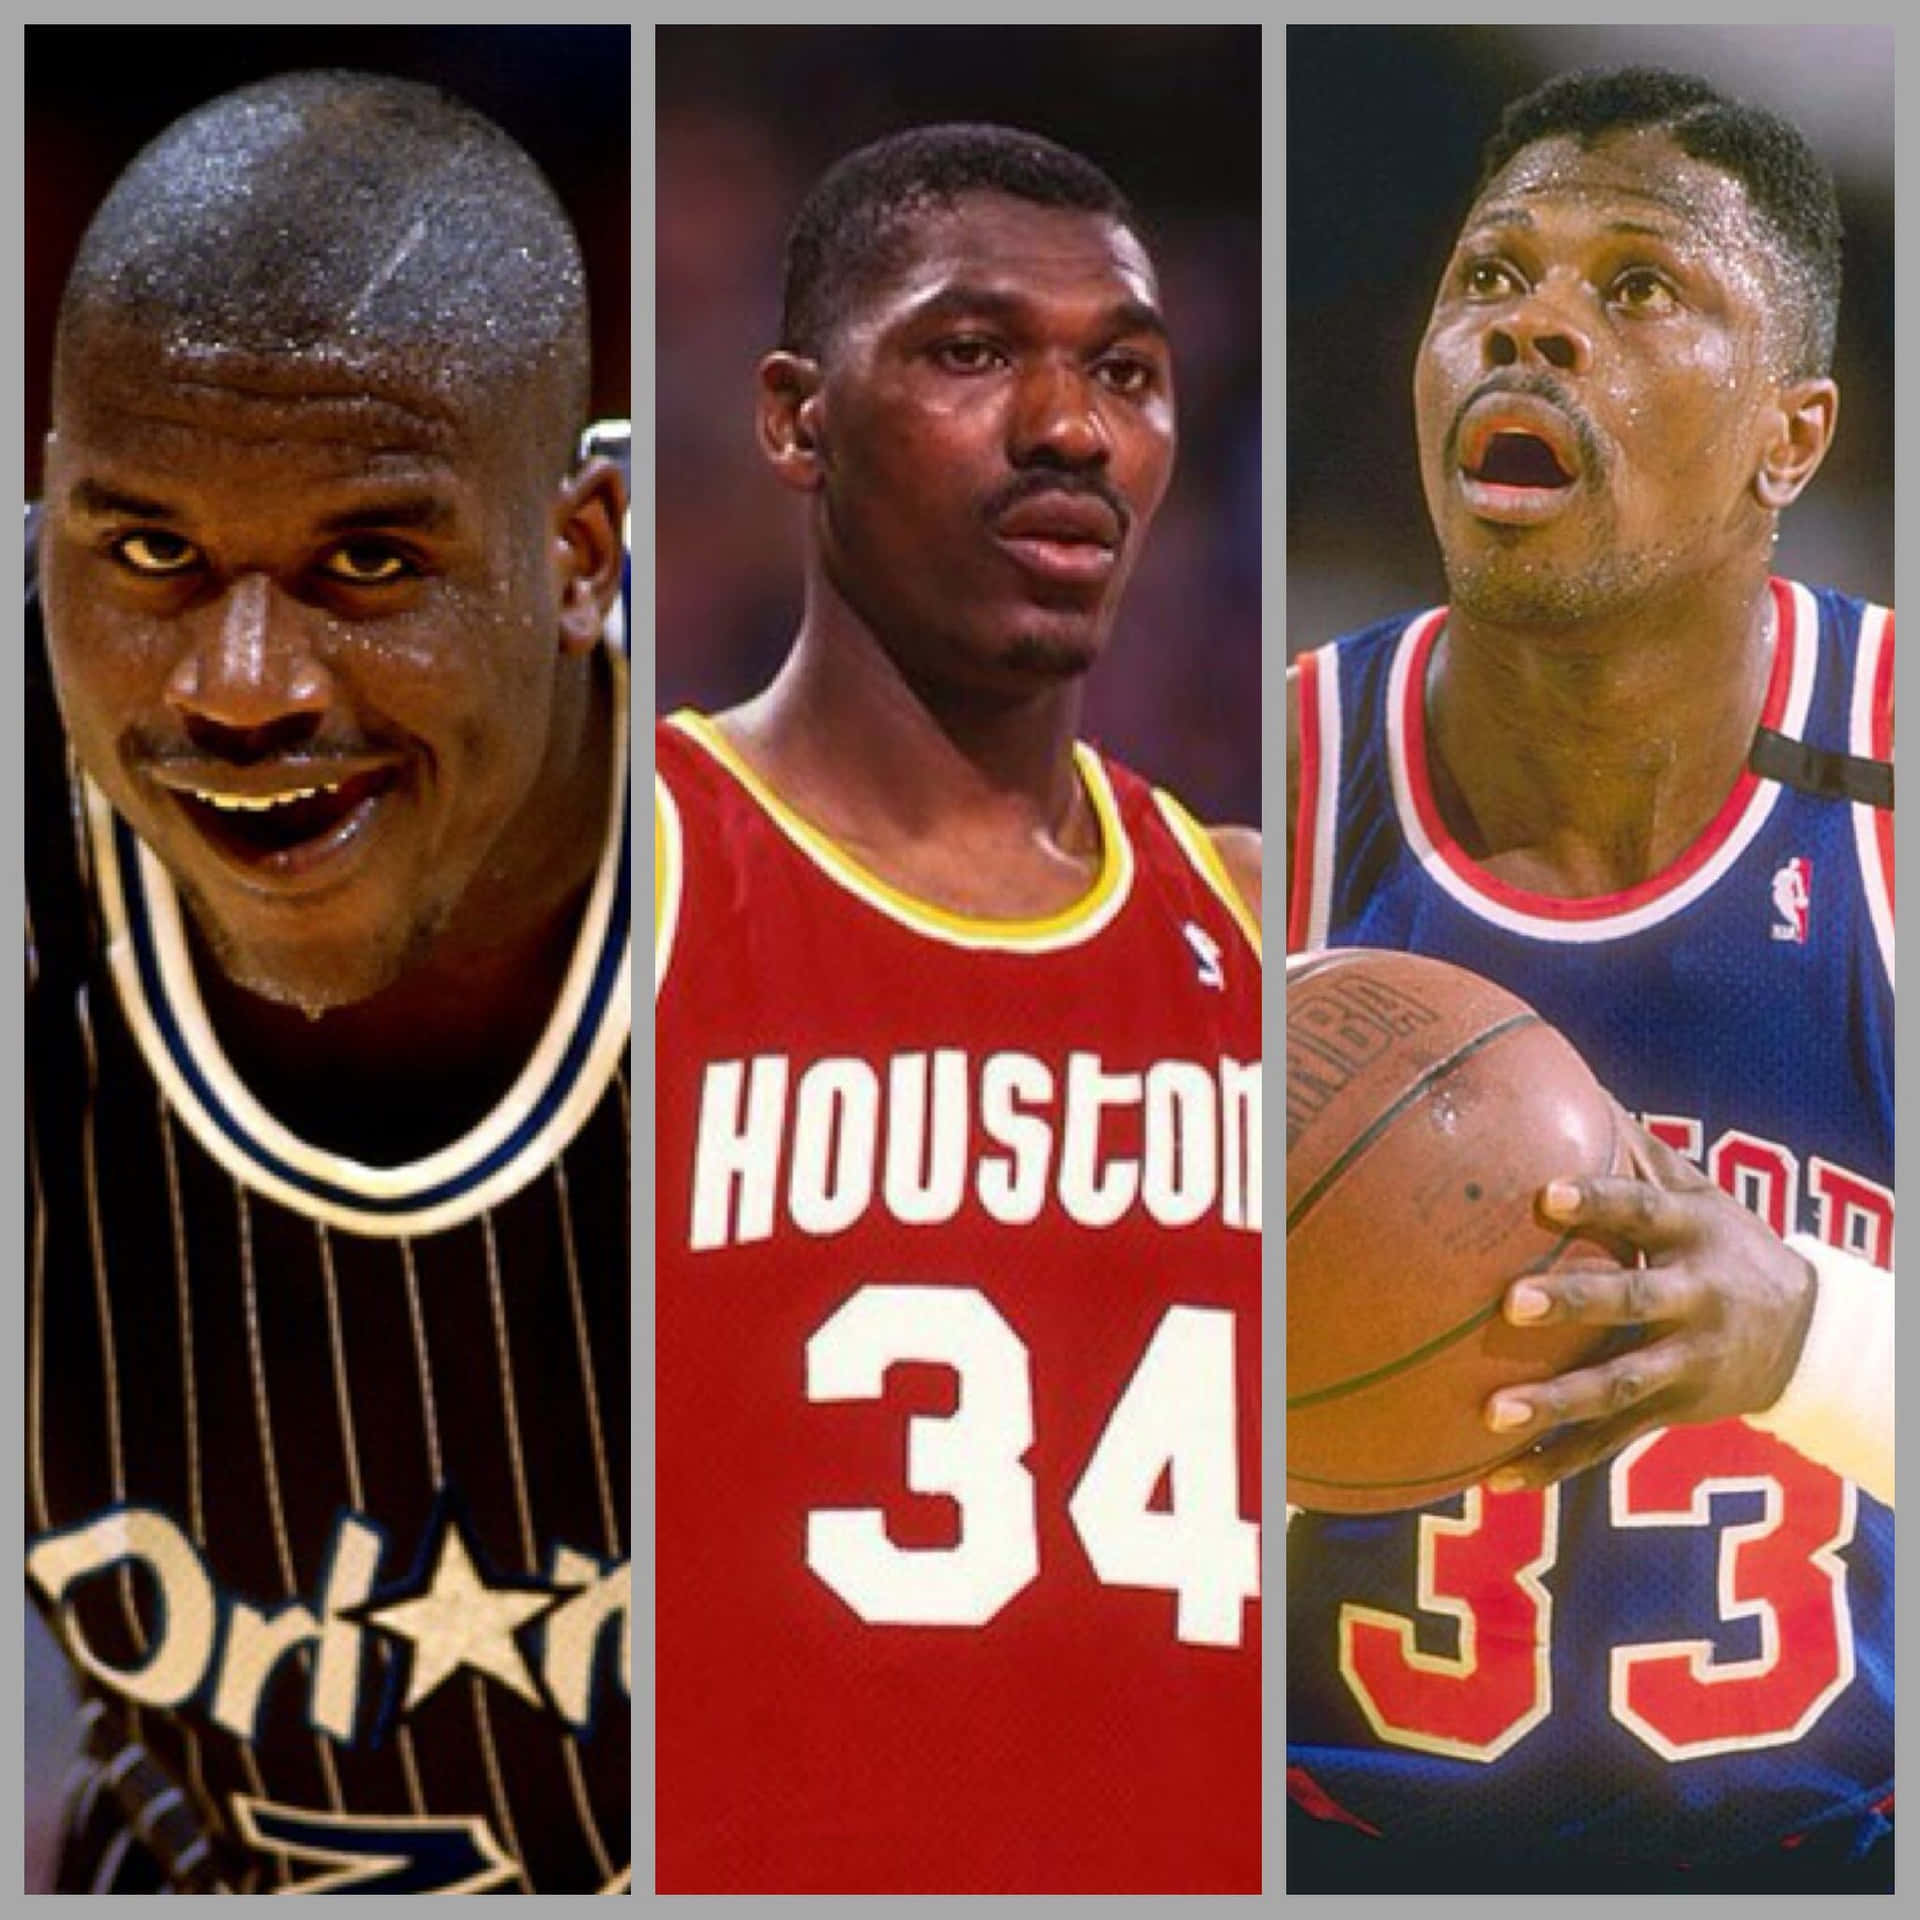 Houston Rockets on X  𝟰𝟭 𝗣𝗧𝗦 𝗖𝗮𝗿𝗲𝗲𝗿 𝗛𝗶𝗴𝗵  The first  40point game by a Rockets rookie since Hakeem Olajuwon  httpstcopCSPsHQhHA  X